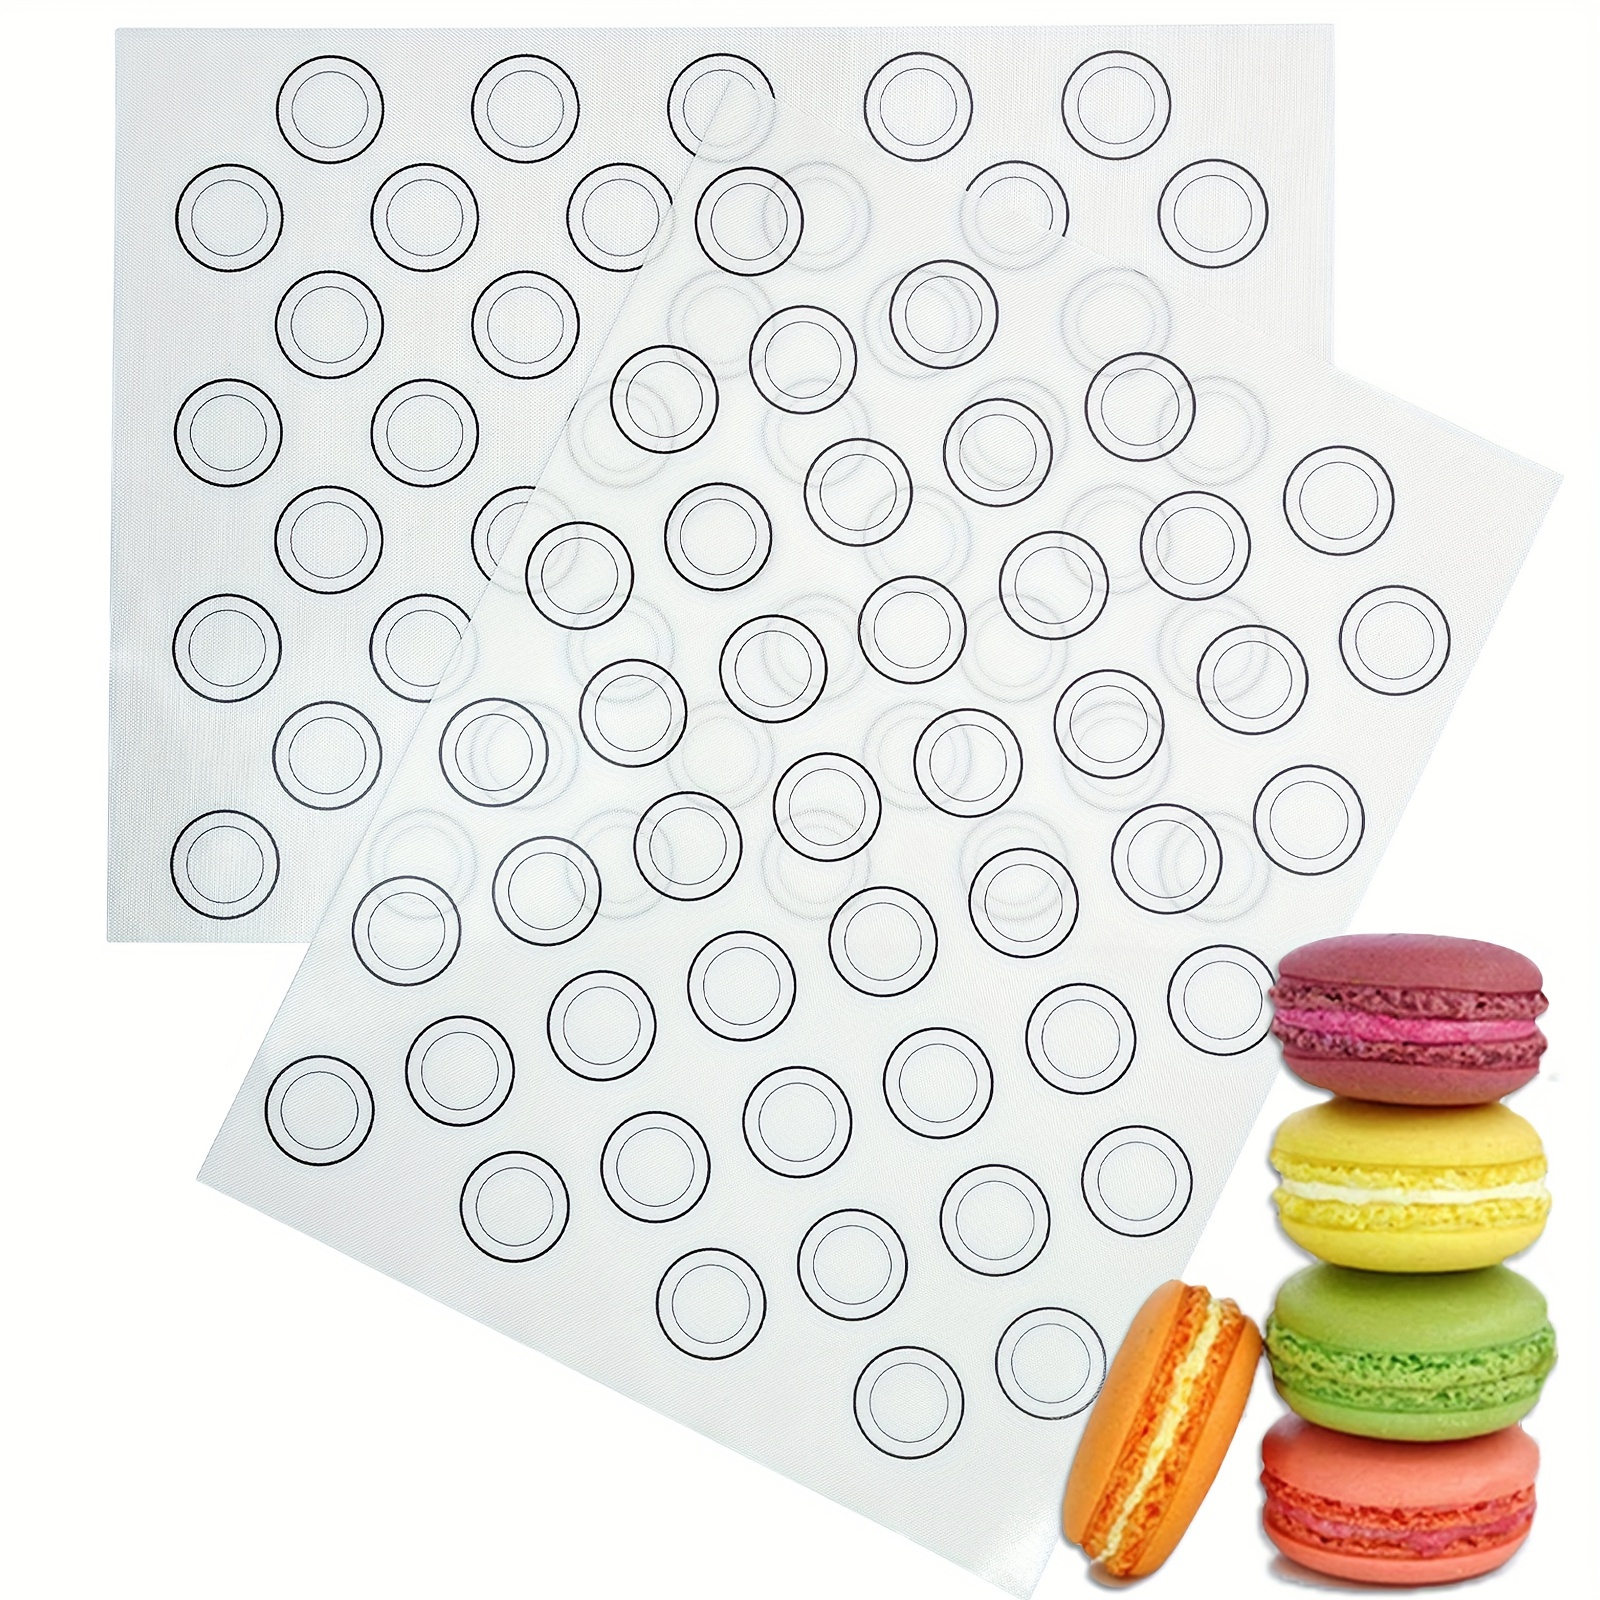 

1pc Nonstick Macaron Silicone Baking Mat For Oven - Easy To Clean And Perfect For Homemade Macarons And Cookies - 15.75 X 11.75 Inches